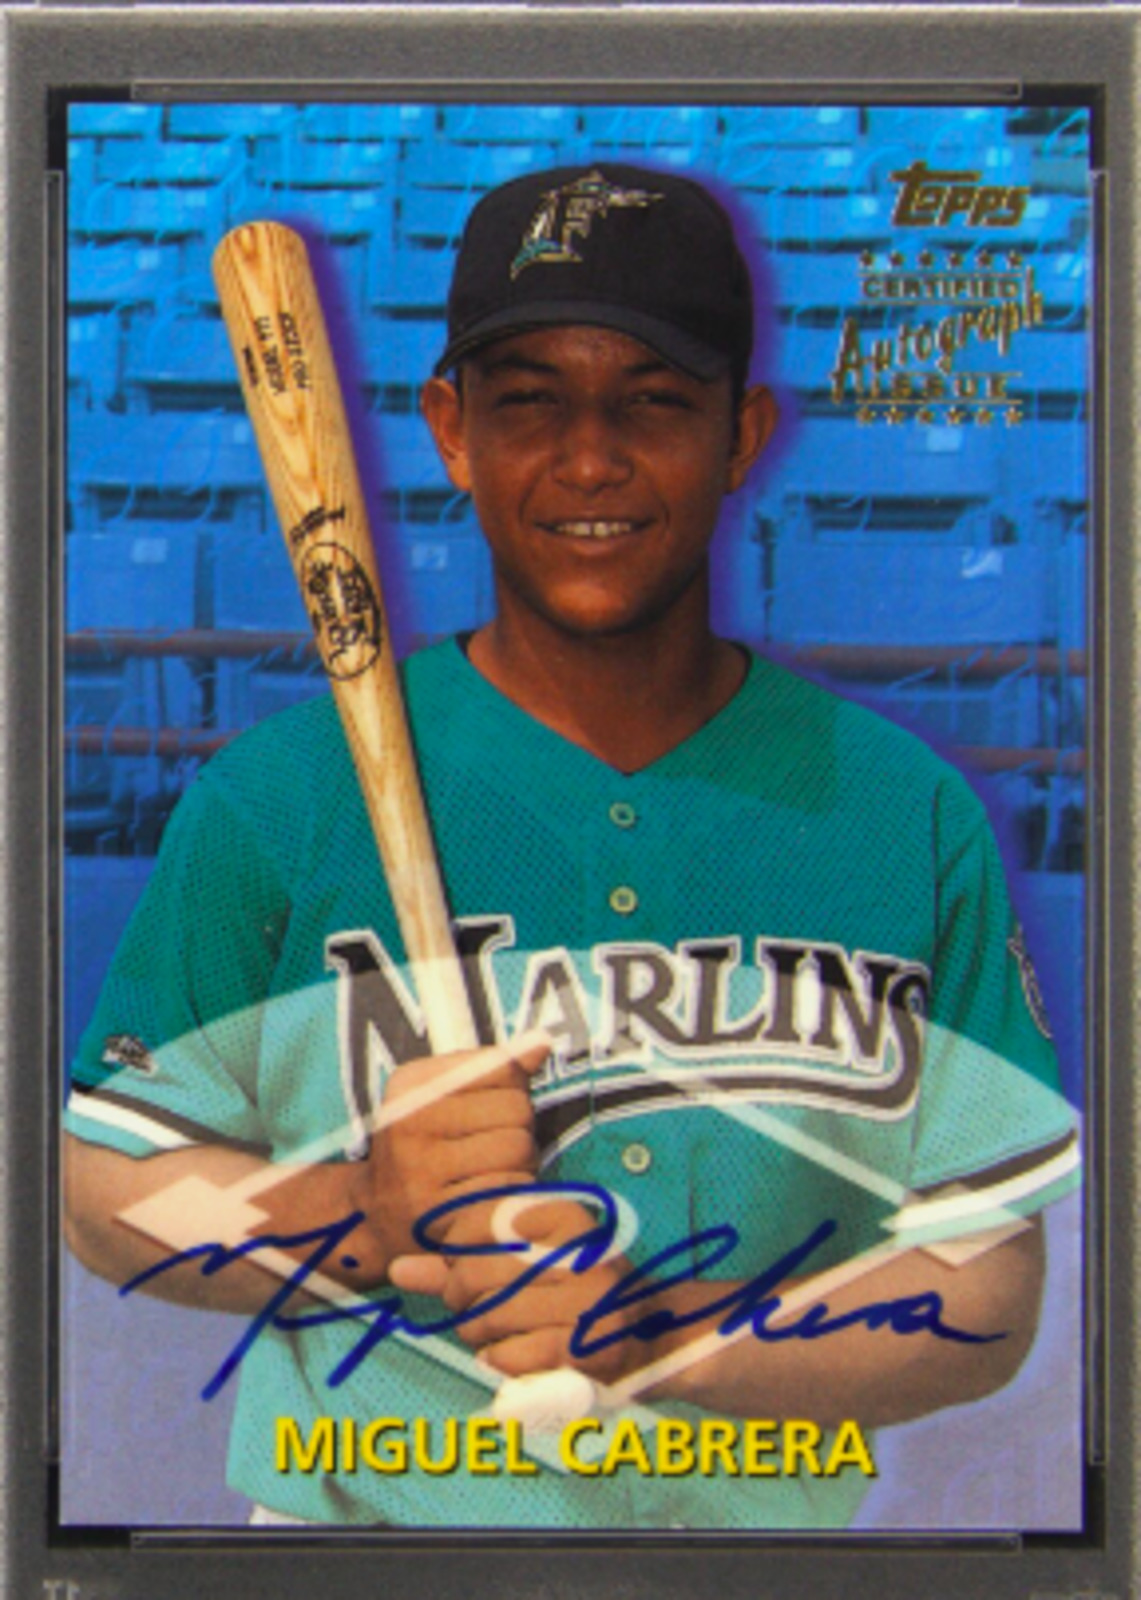 2000 Topps Traded Autographs Miguel Cabrera rookie card